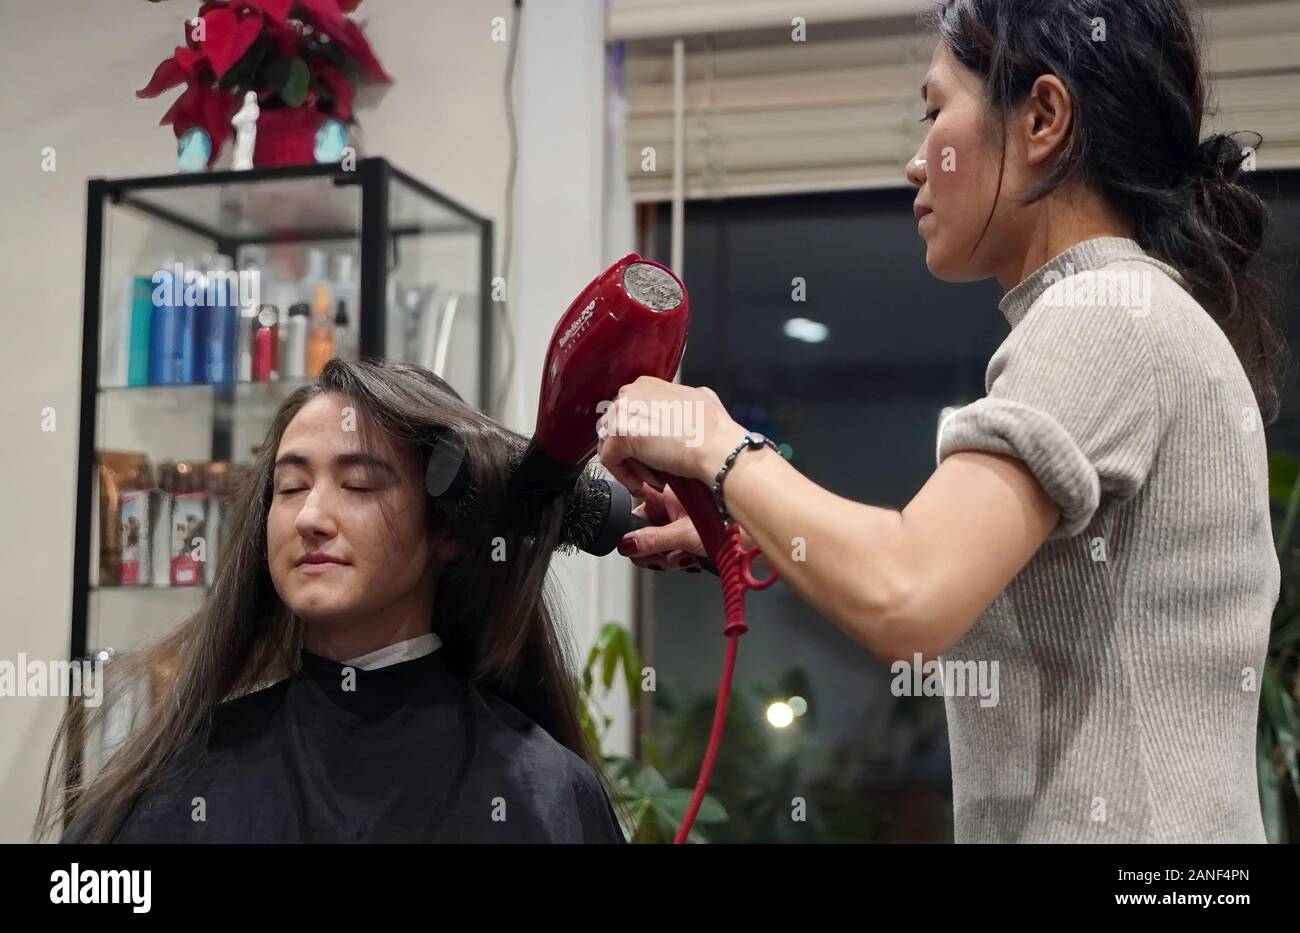 Cromwell, CT / USA - December 27, 2019: Asian hair stylist straightens a female patron's hair Stock Photo